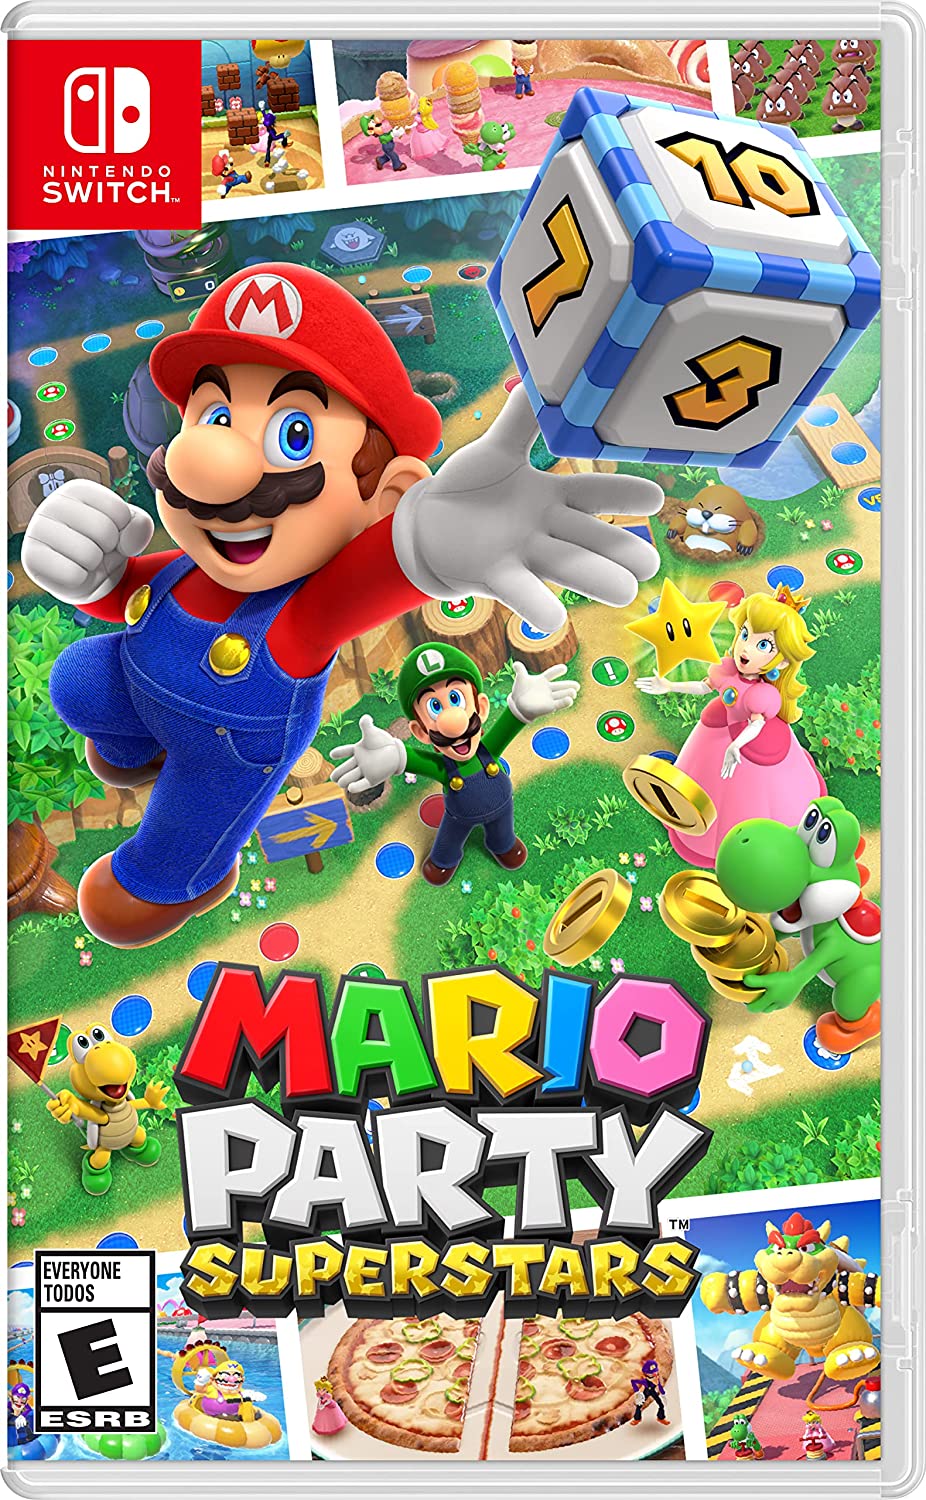 Mario Party Superstars for Nintendo Switch cover art.